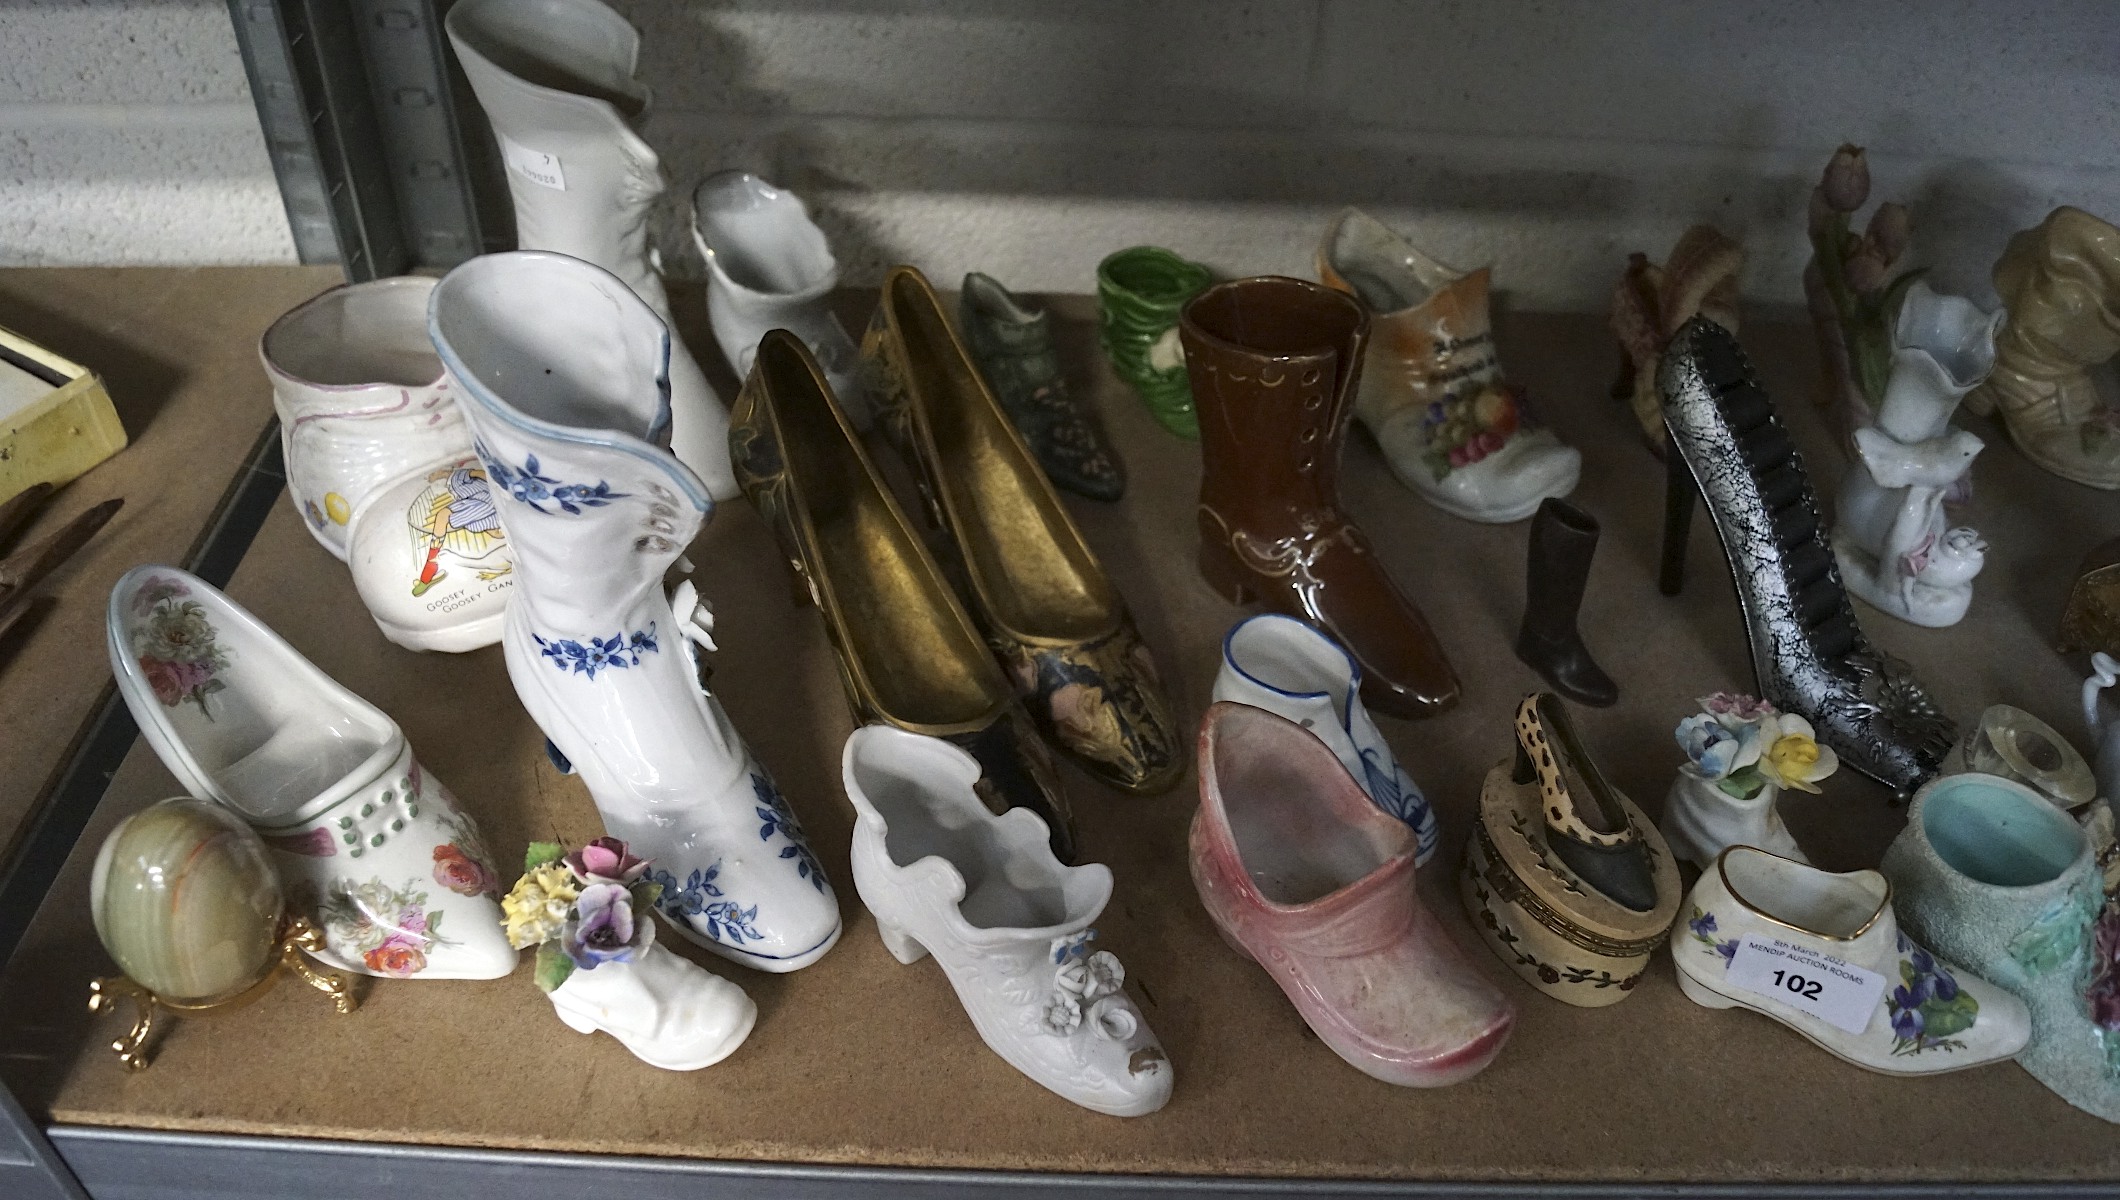 A large collection of ceramic and pottery shoe and boot ornaments, - Image 3 of 5